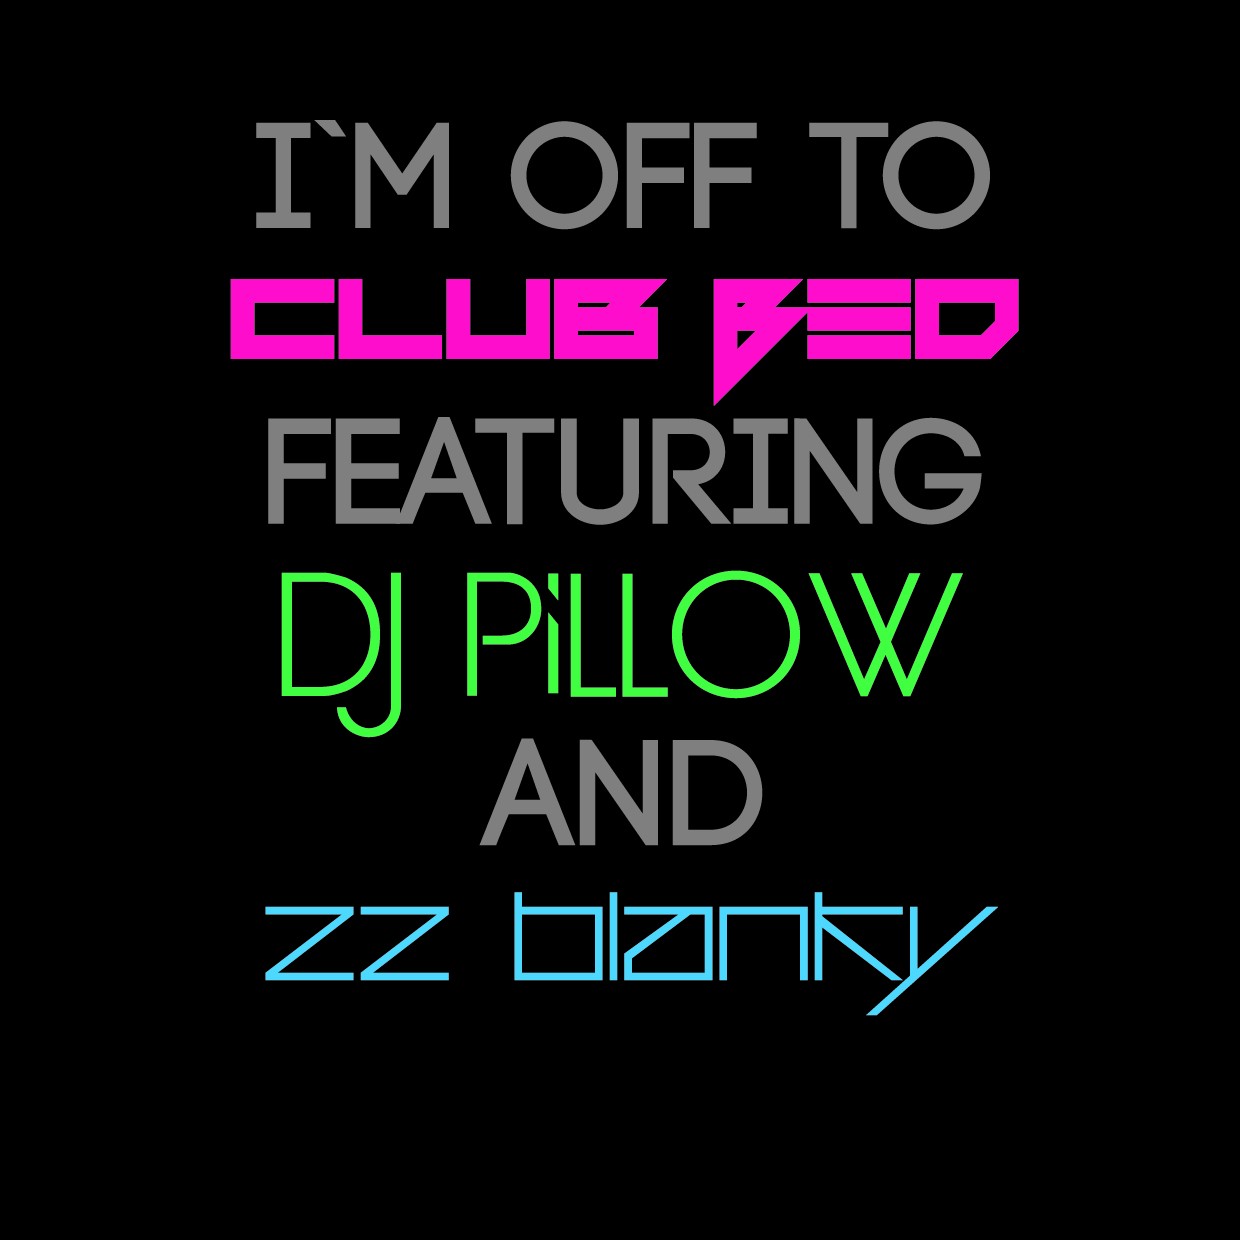 Club Bed and DJ Pillow